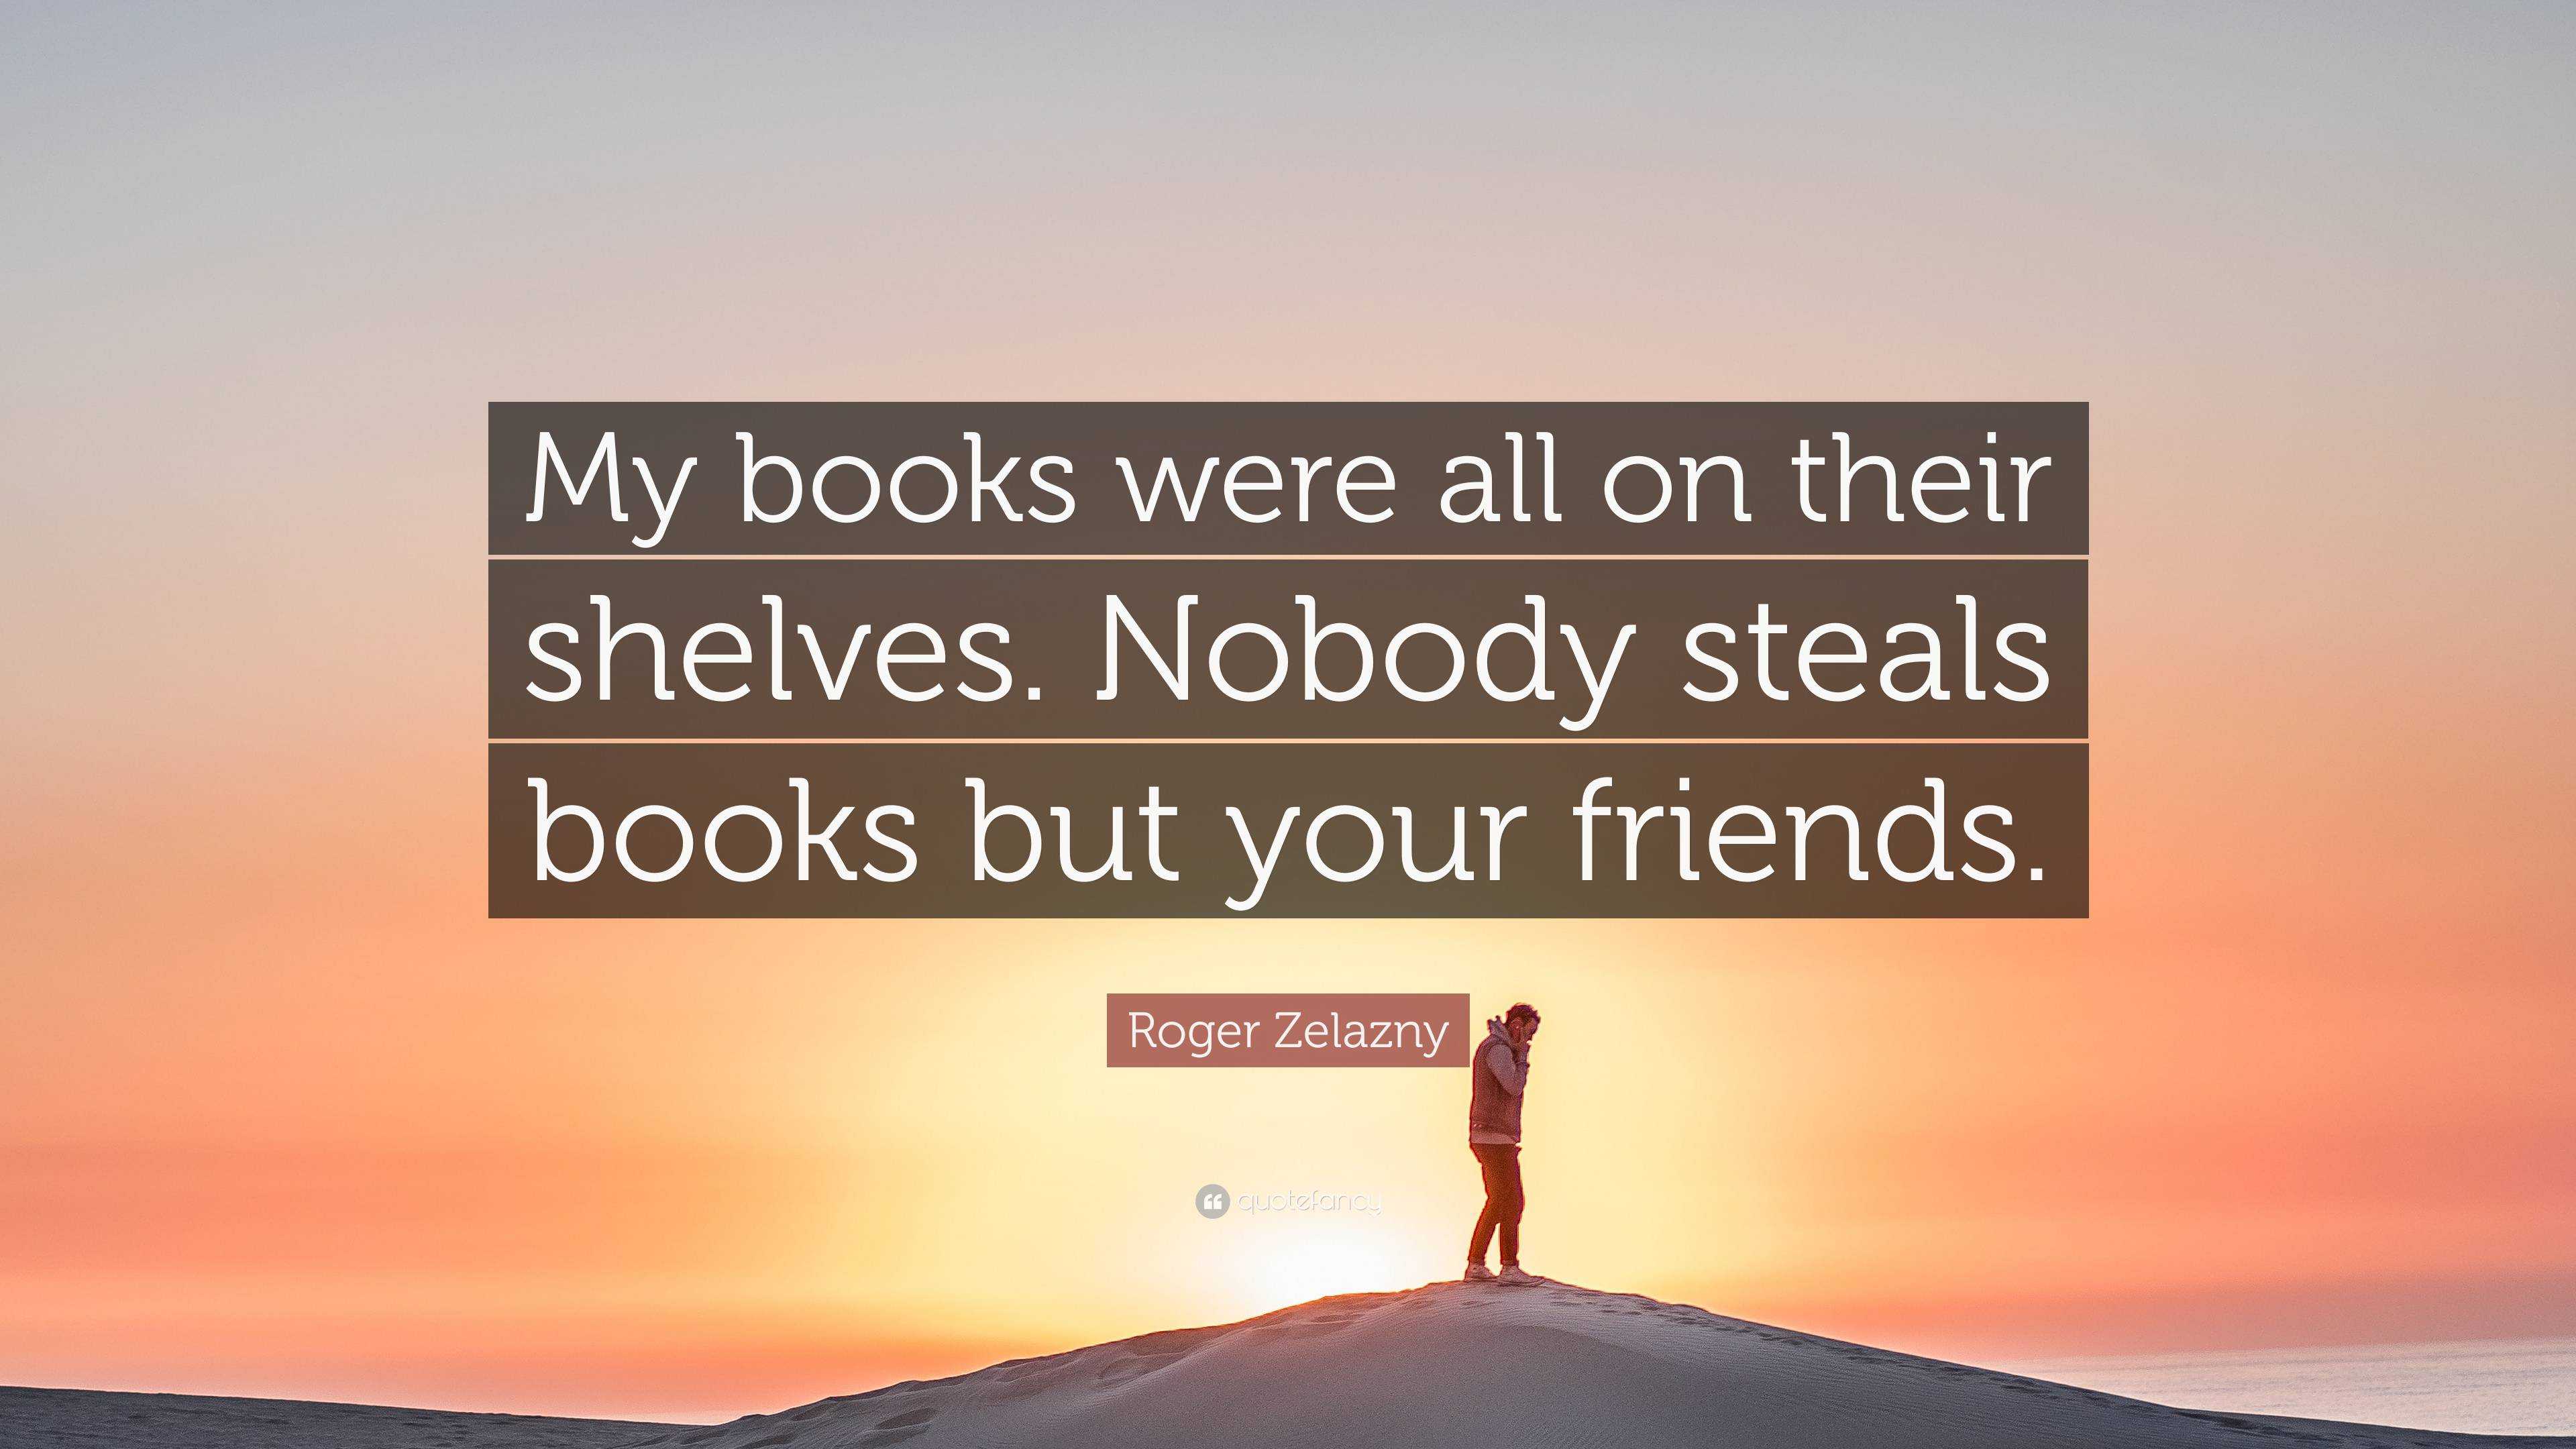 Roger Zelazny Quote: “My books were all on their shelves. Nobody steals ...